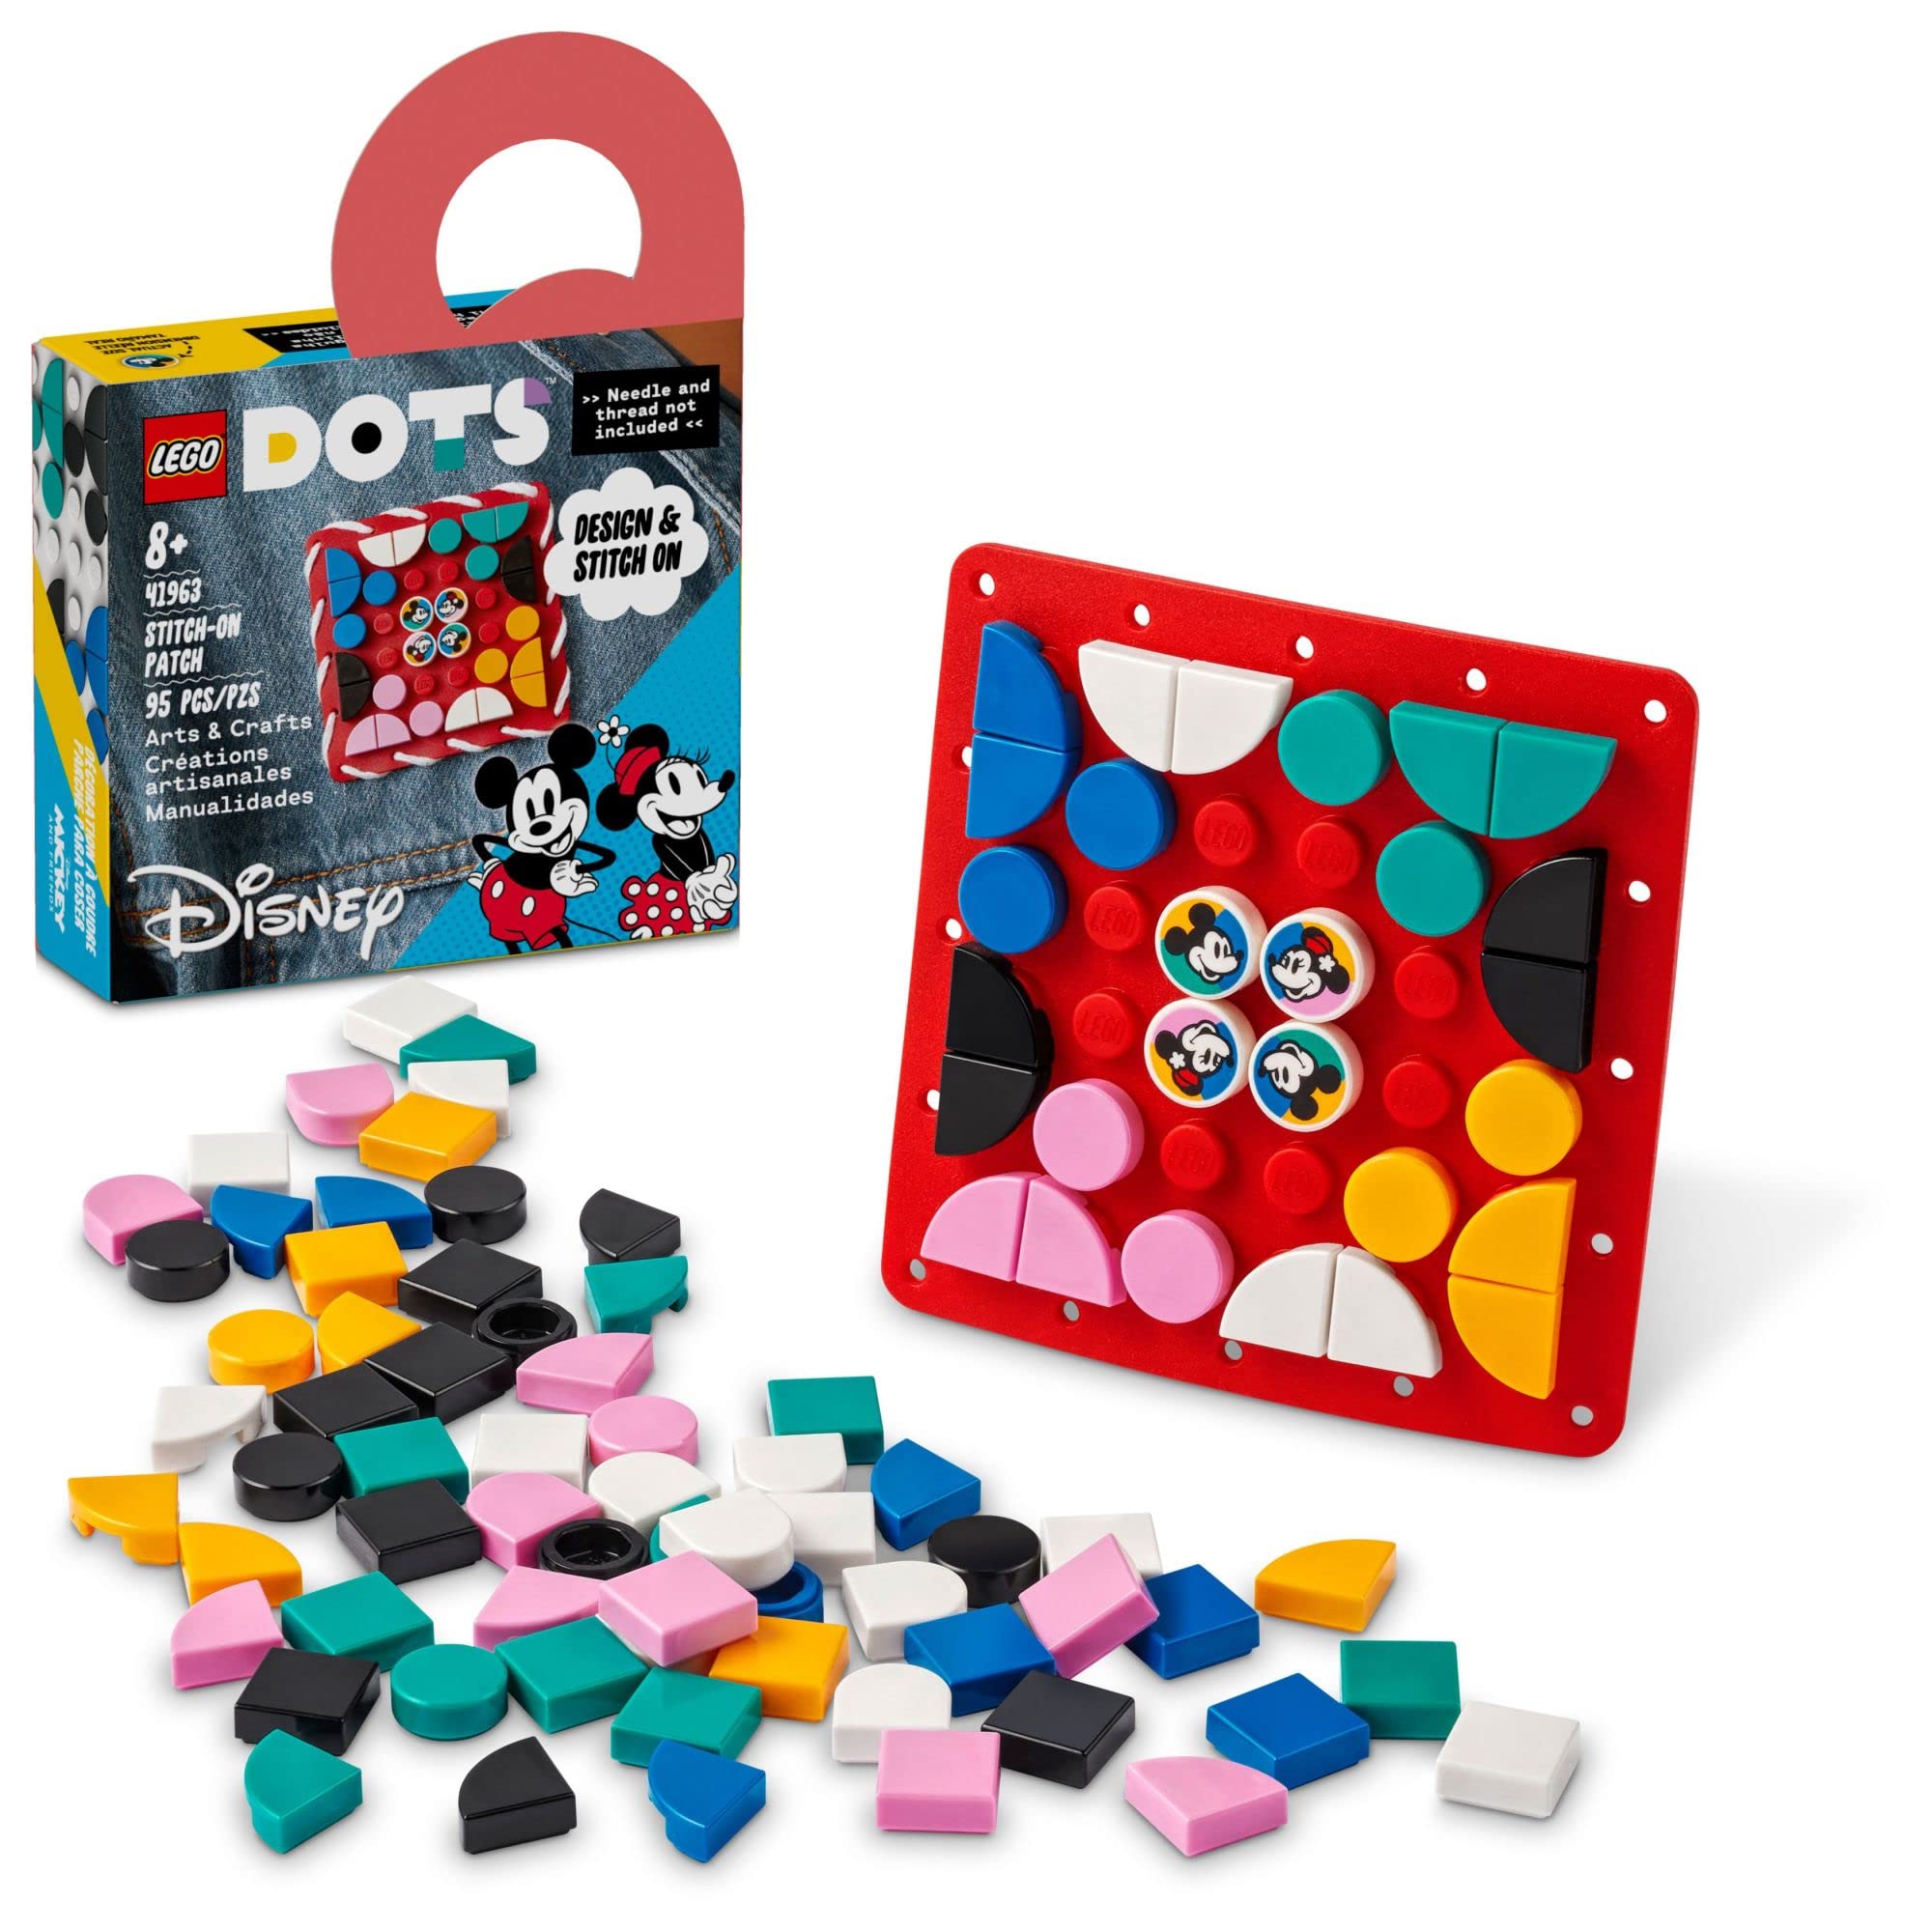 95-Piece LEGO Dots Disney Mickey and Minnie Mouse Stitch-On Patch $2.93 + Free Shipping w/ Prime or on $25+